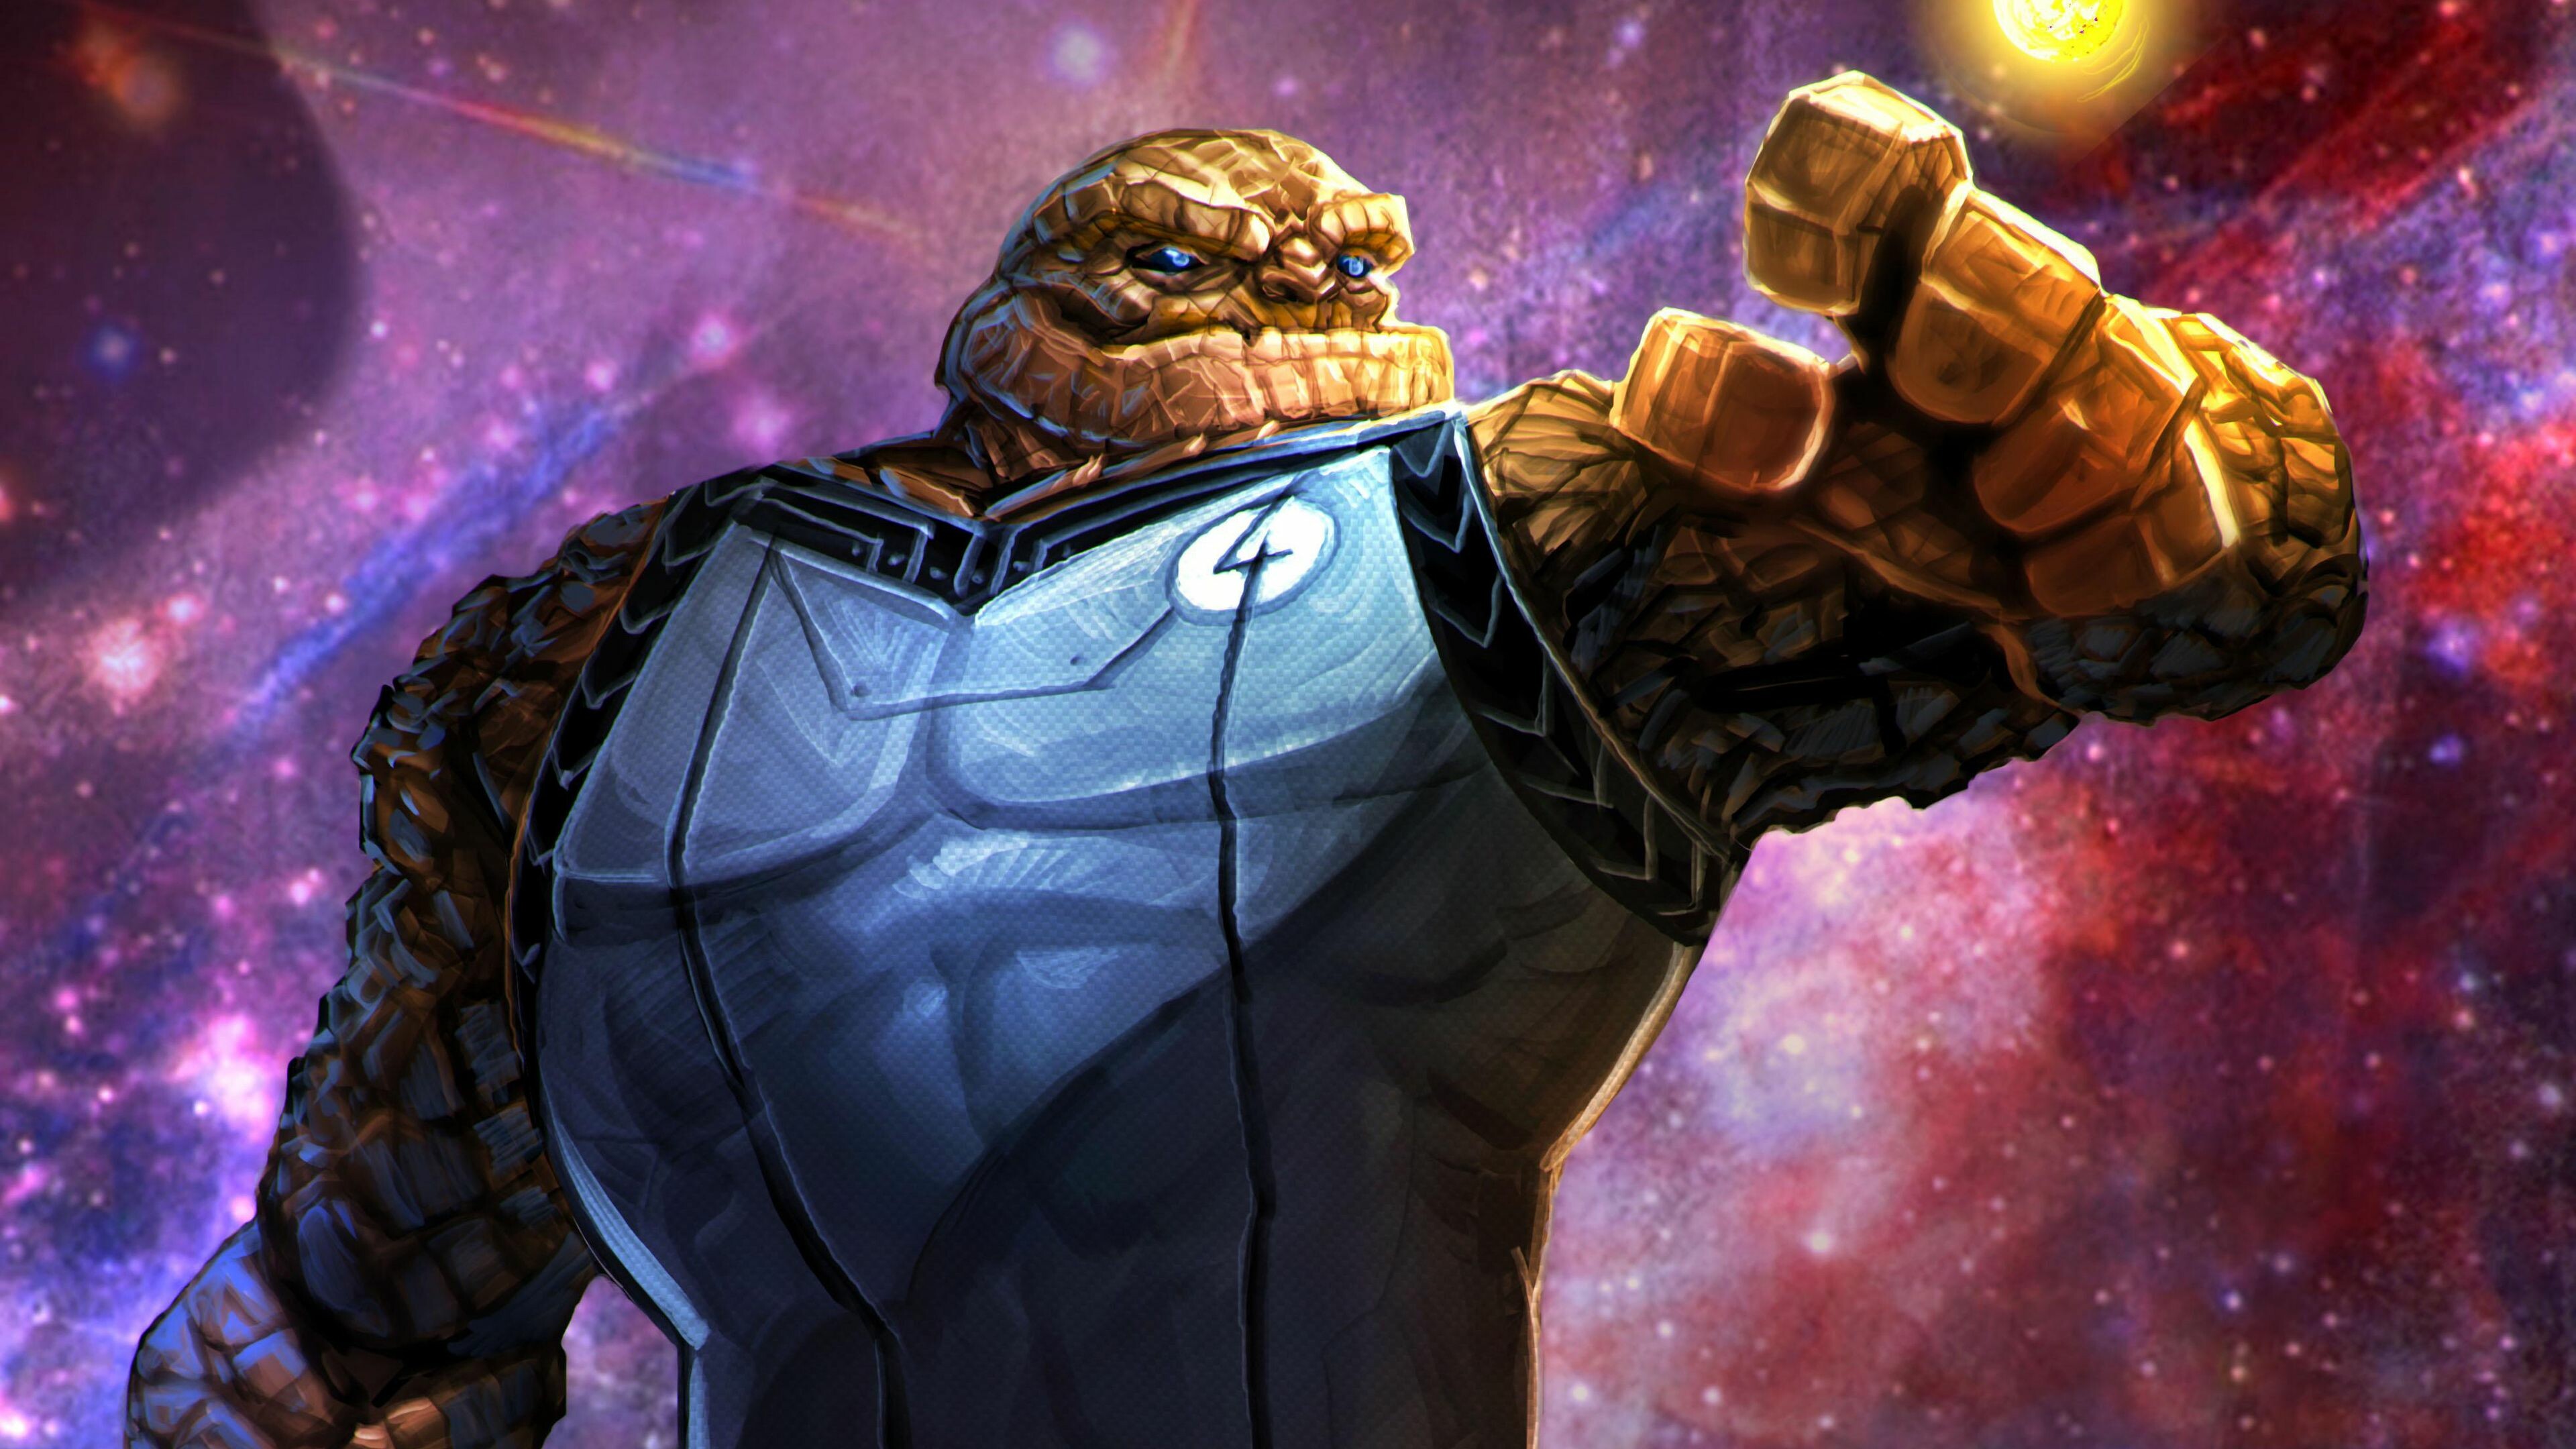 Fantastic 4: Benjamin Jacob Grimm, Known as The Thing, A superhero. 3840x2160 4K Background.